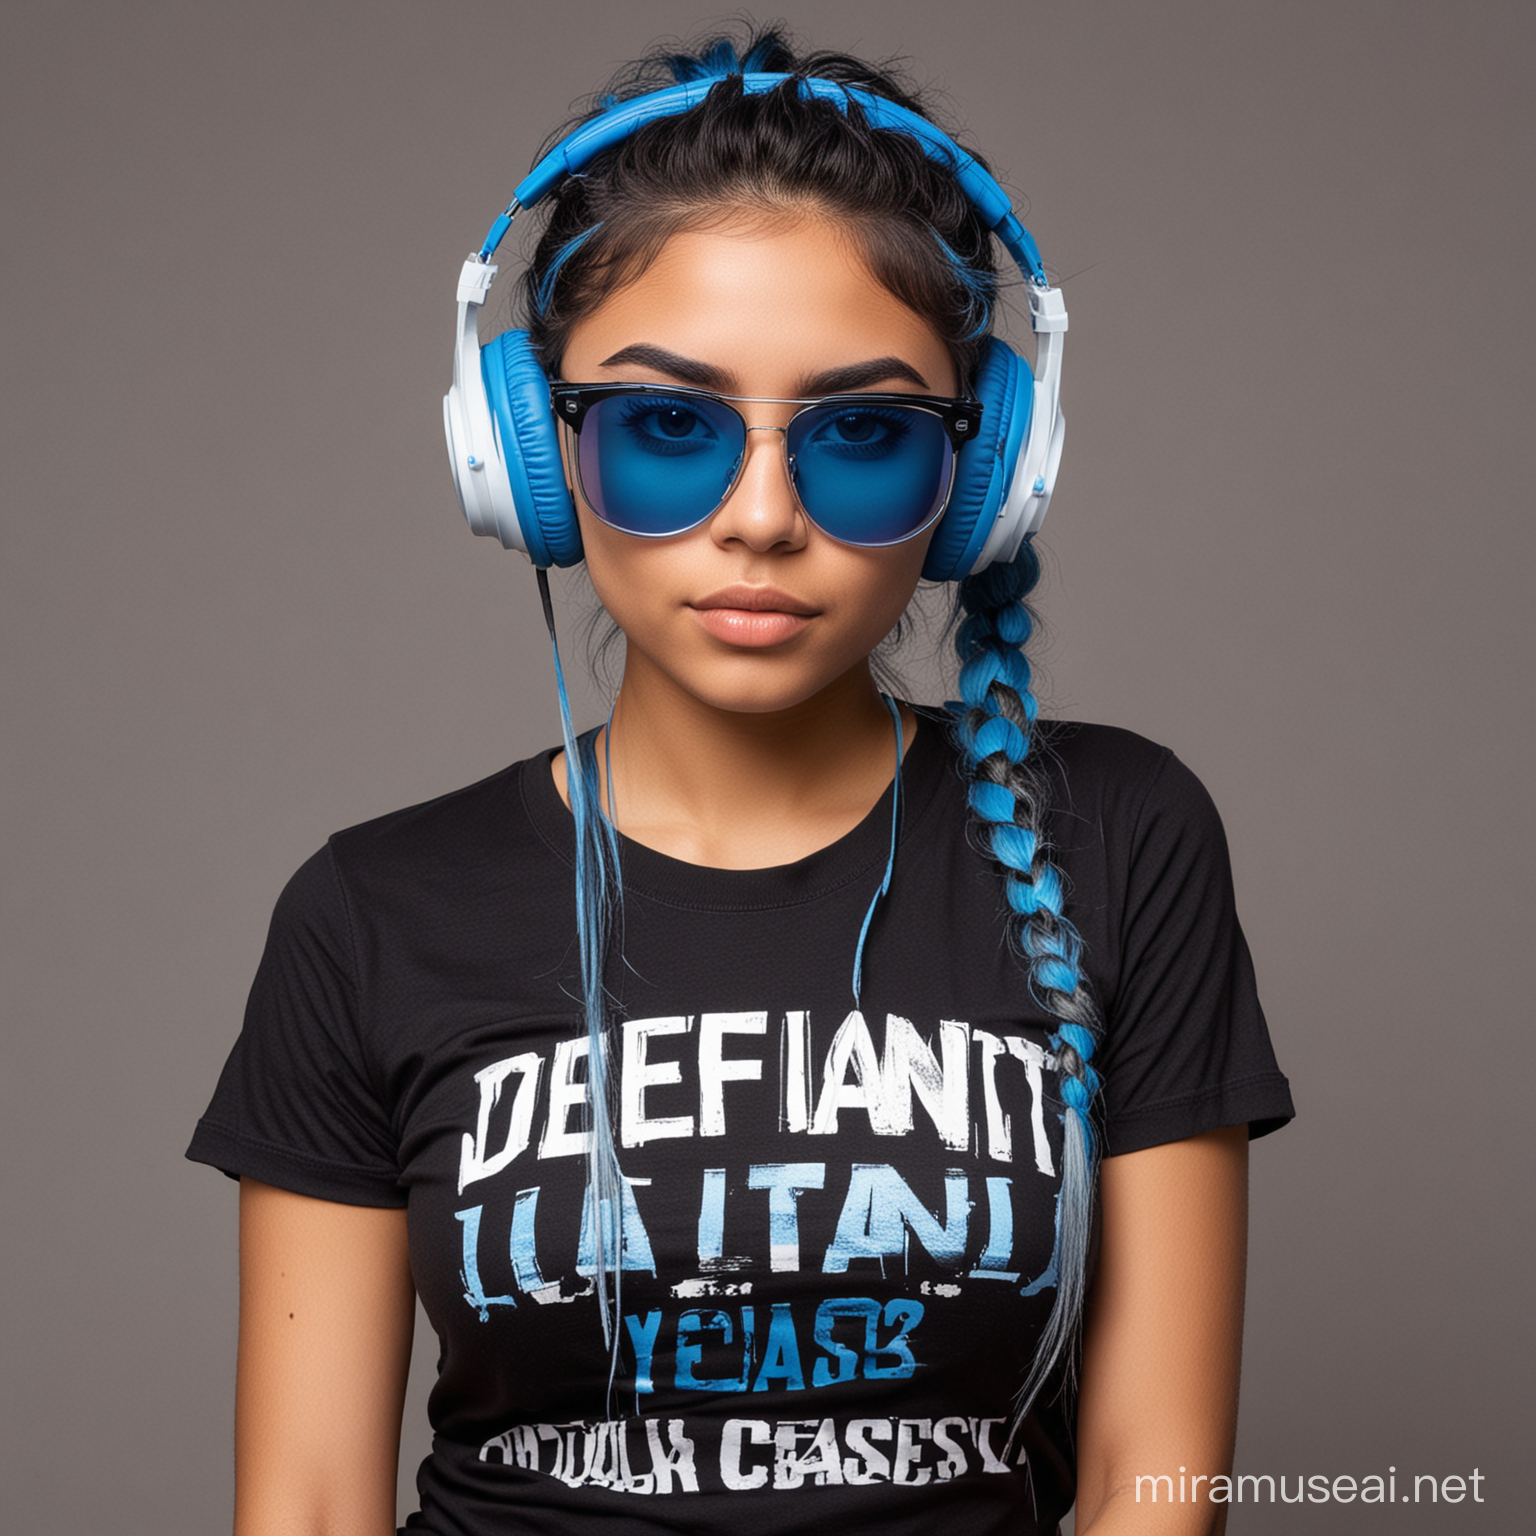 Defiant Latina 20 years old standing with arms crossed over her chest wearing headphones and cheap sunglasses with blue lenses. She has blue streak in her hair and wears a black t-shirt
